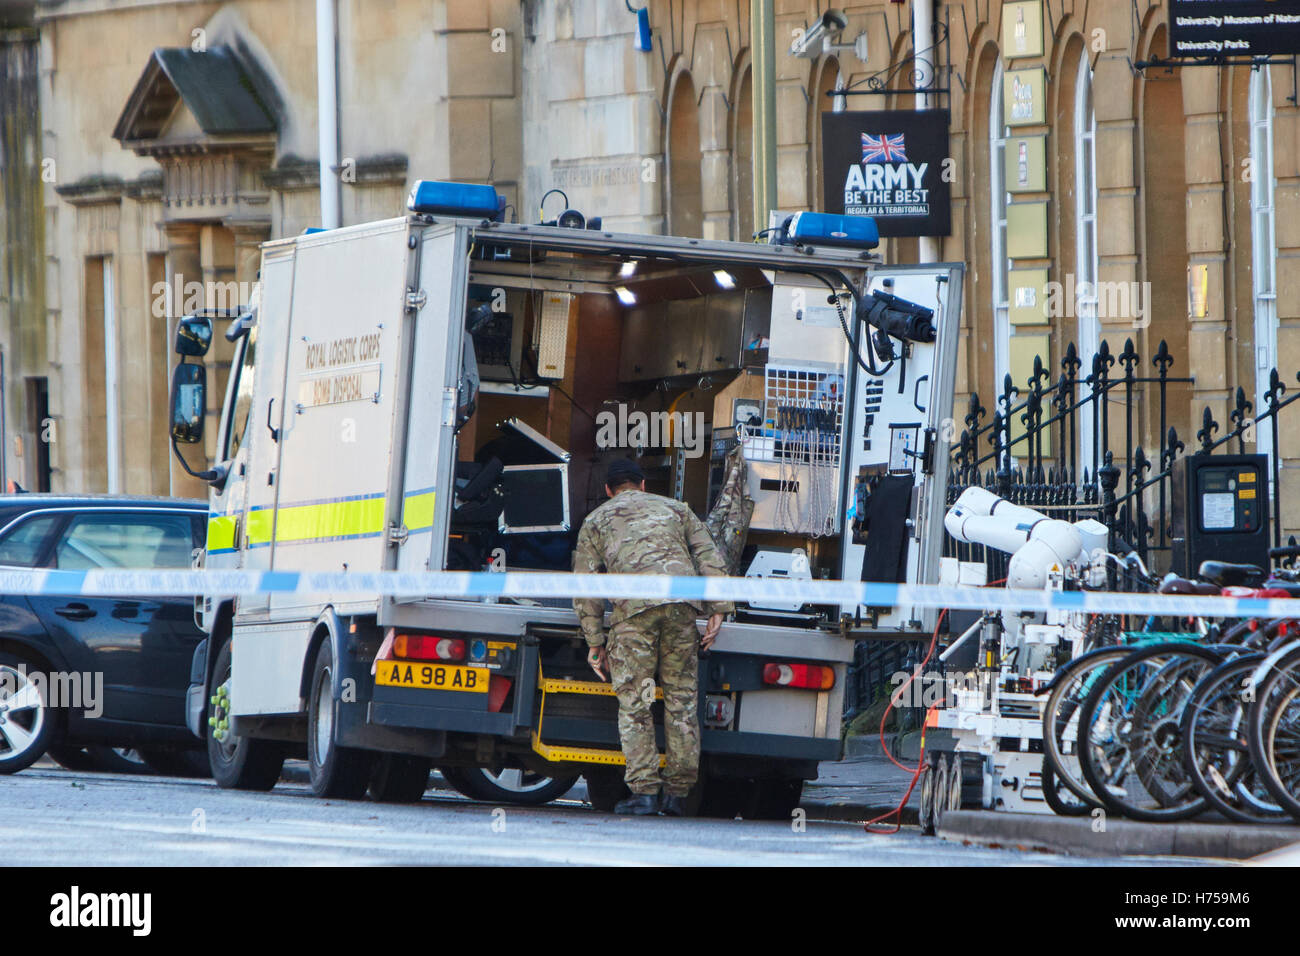 A bomb disposal officer using a remote robot following the discovery of a device at the army recruitment office in Oxford Stock Photo